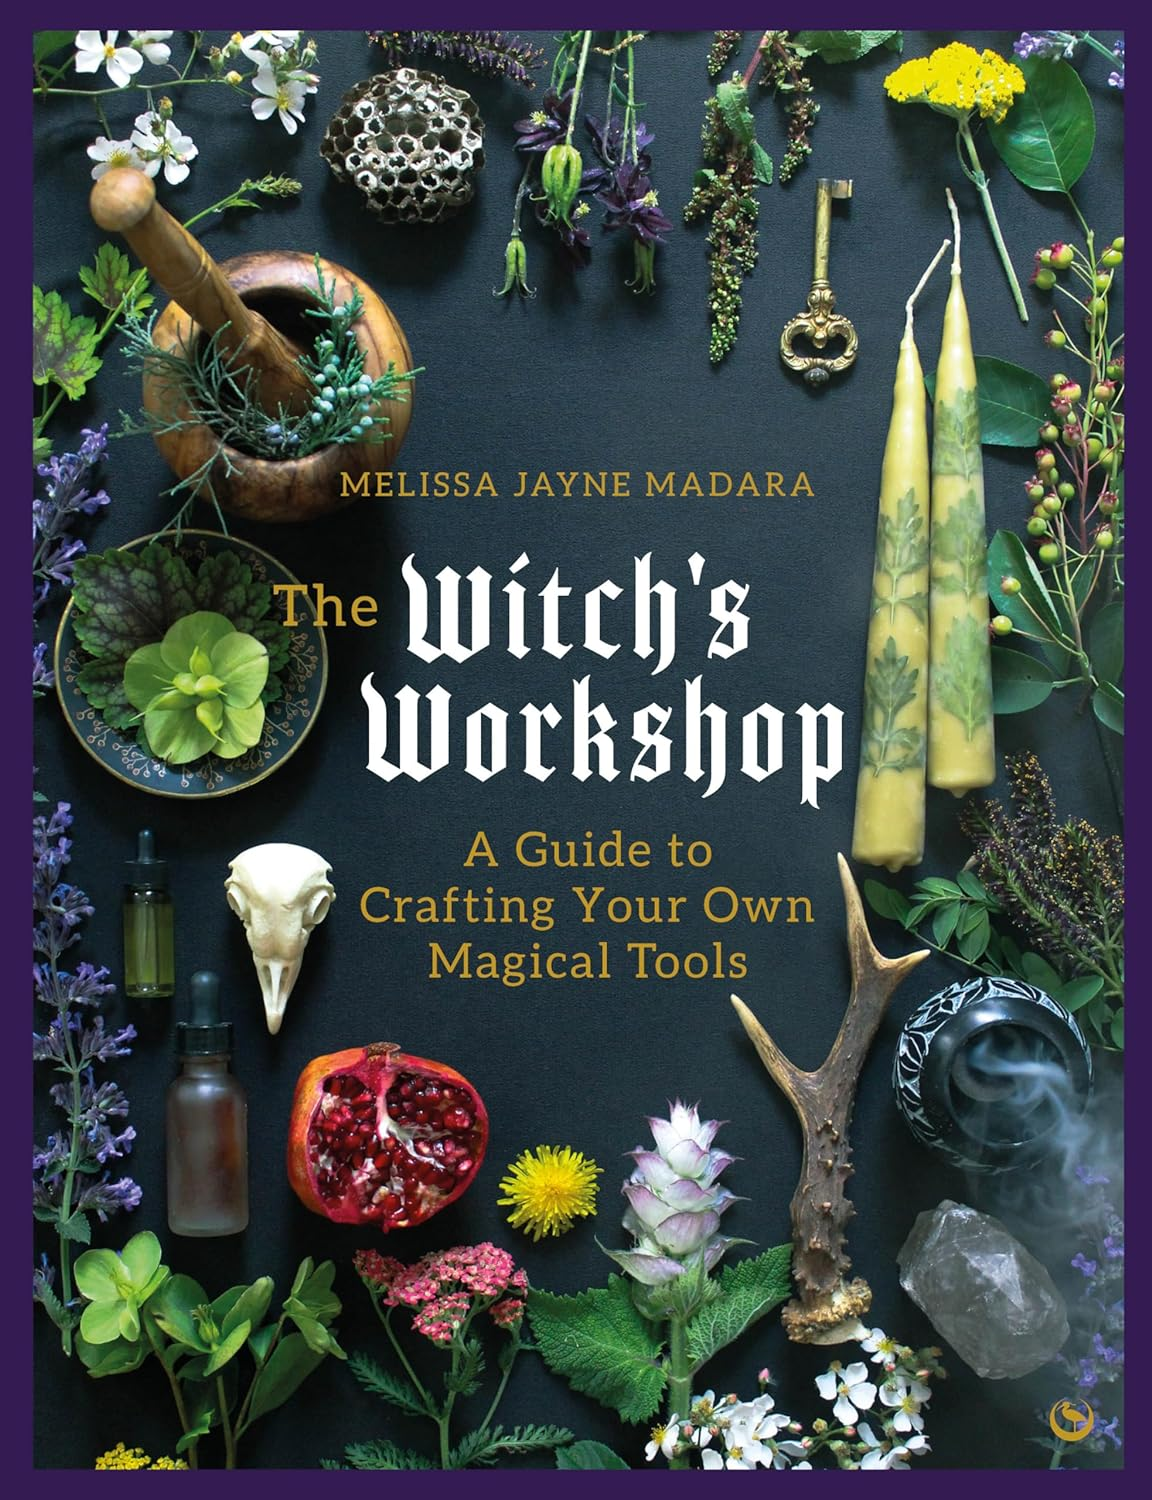 Picture of the book front cover of The Witches Workshop By Melissa Jayne Madara 